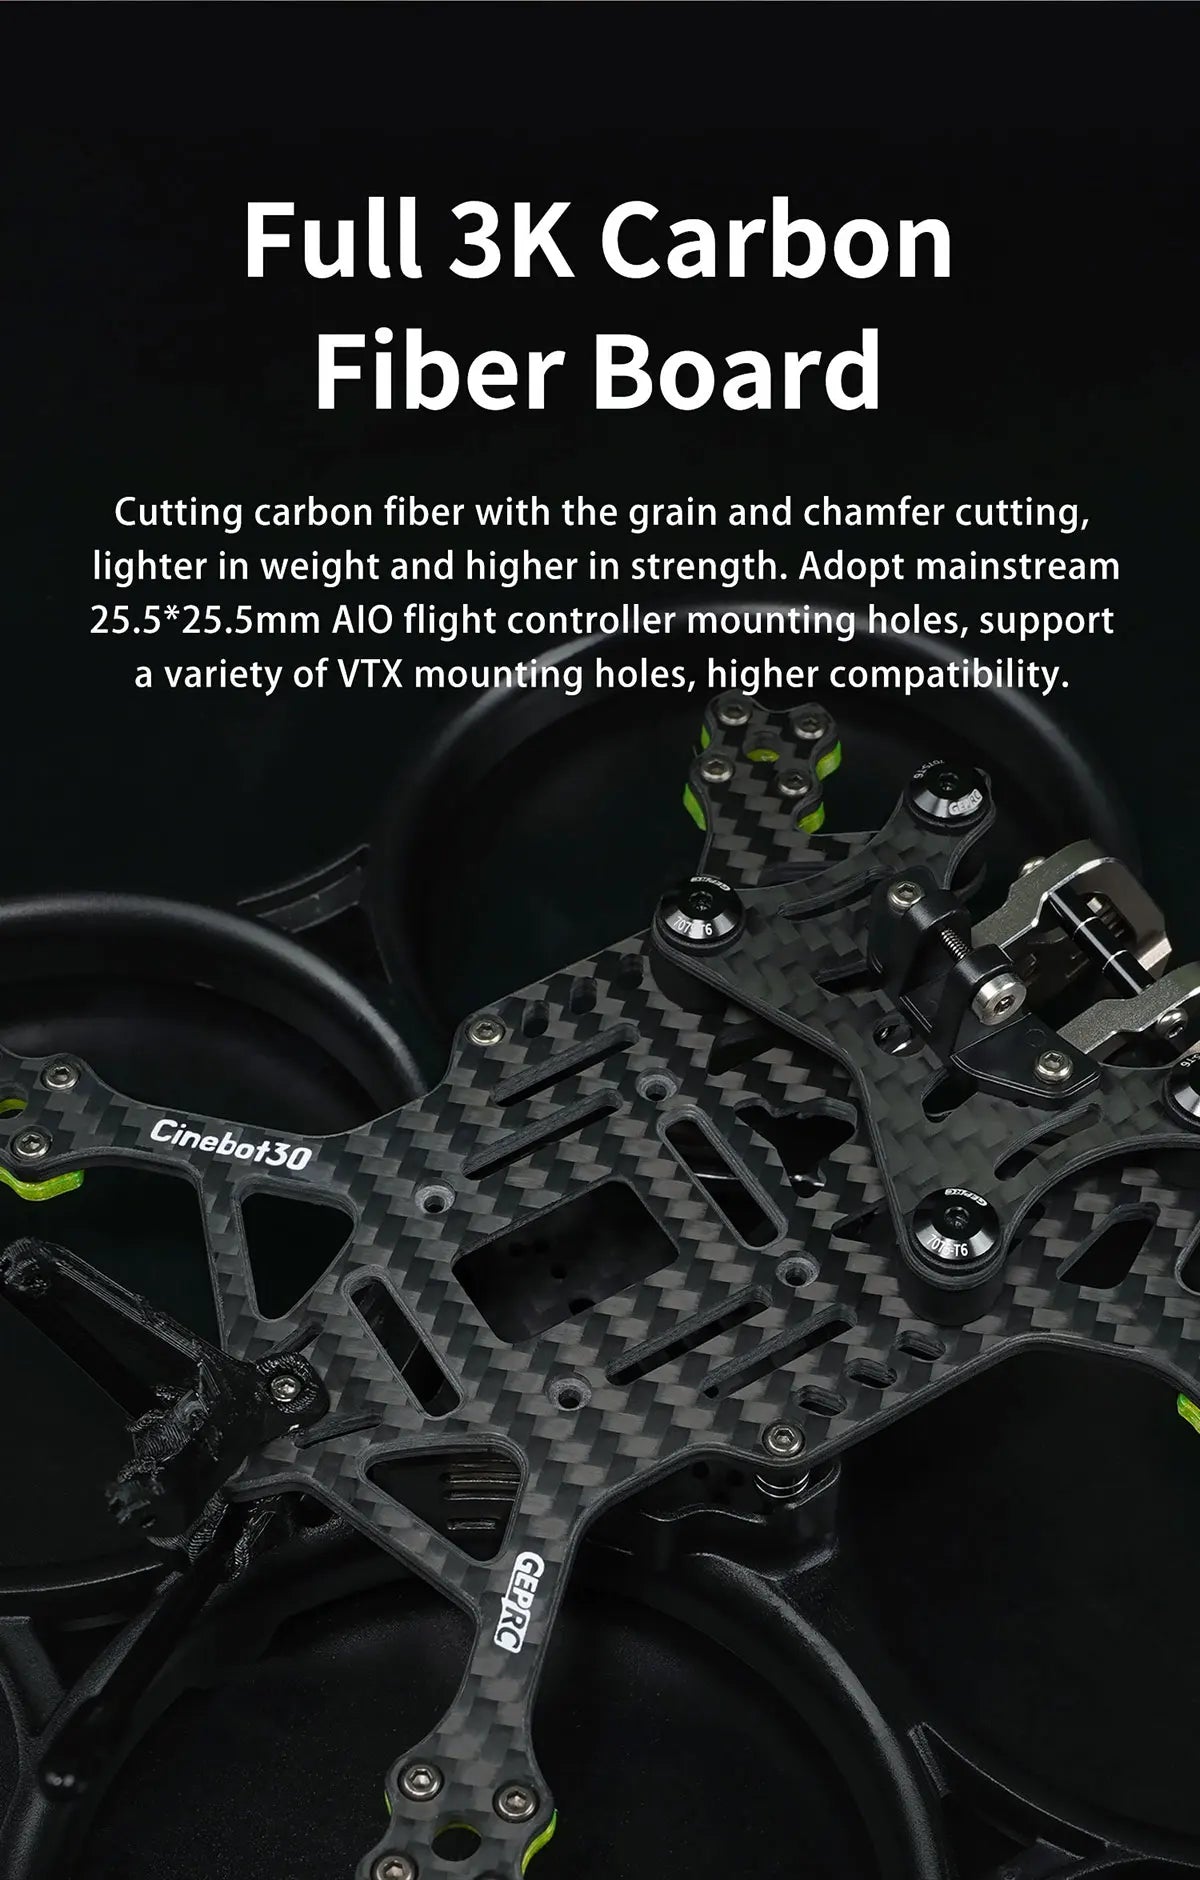 Full 3K Carbon Fiber Board Cutting carbon fiber with the grain and chamfer cutting, lighter